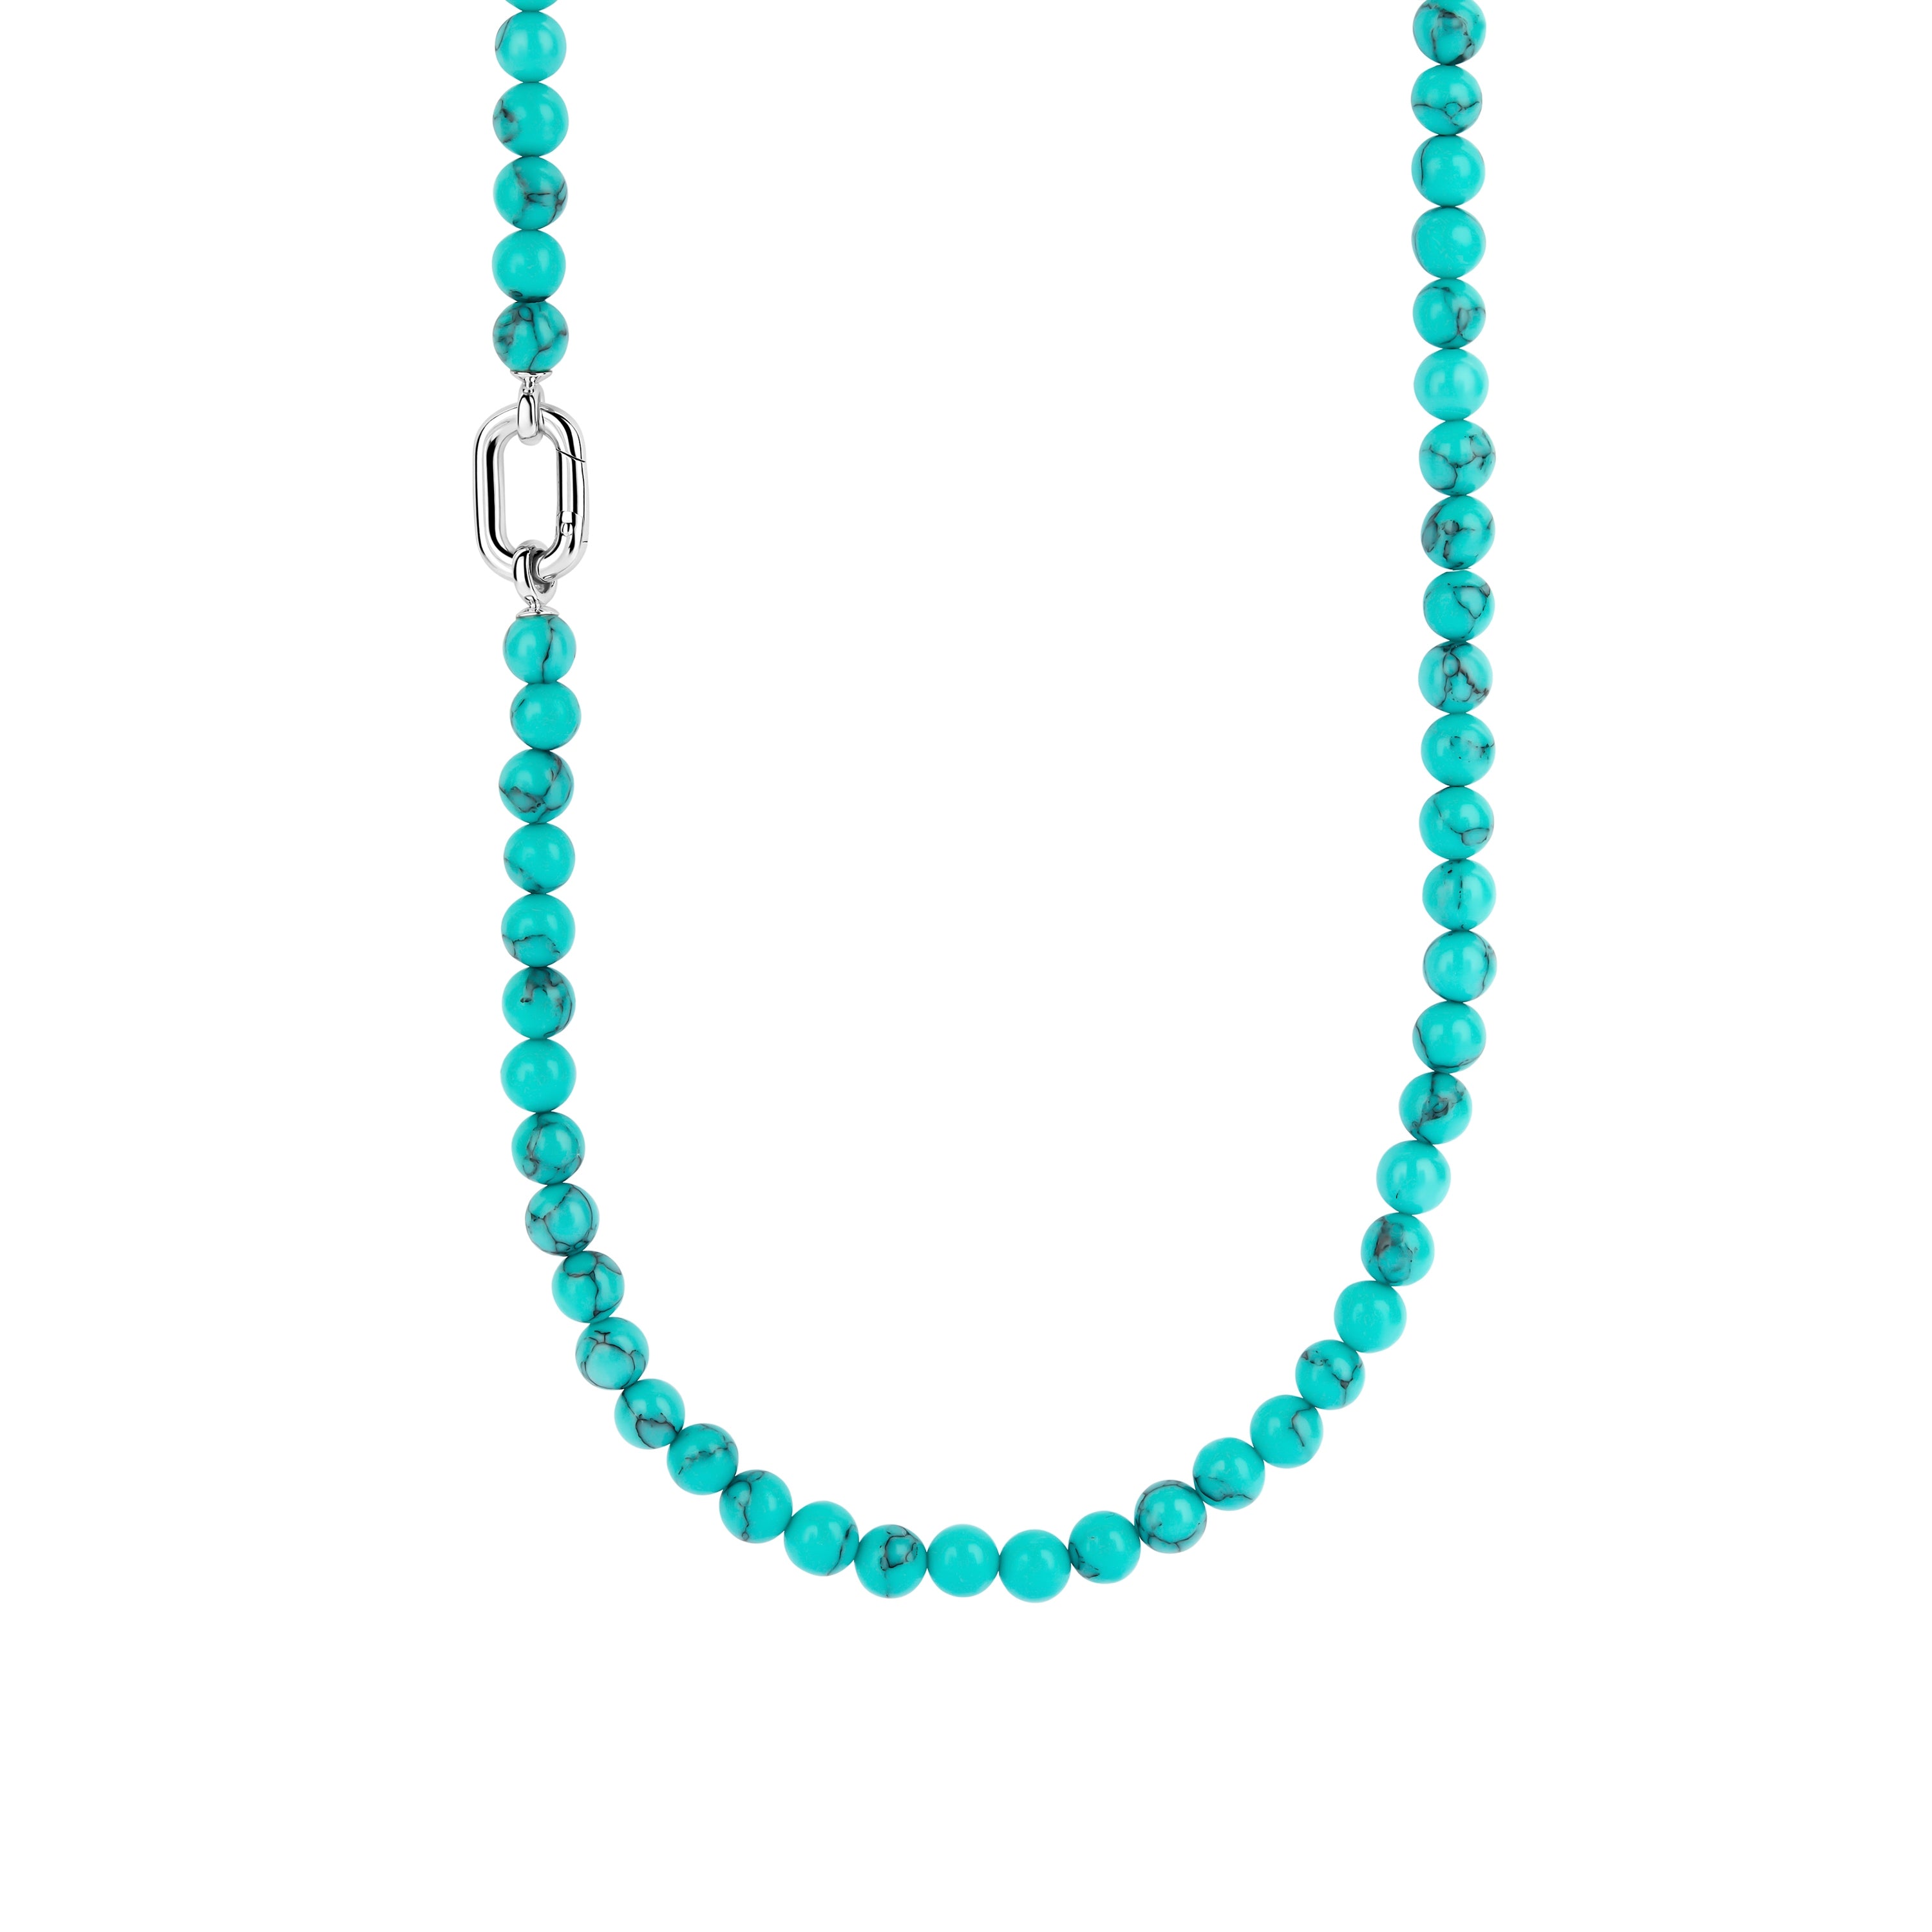 Tropical Turquoise Bead Necklace - Long